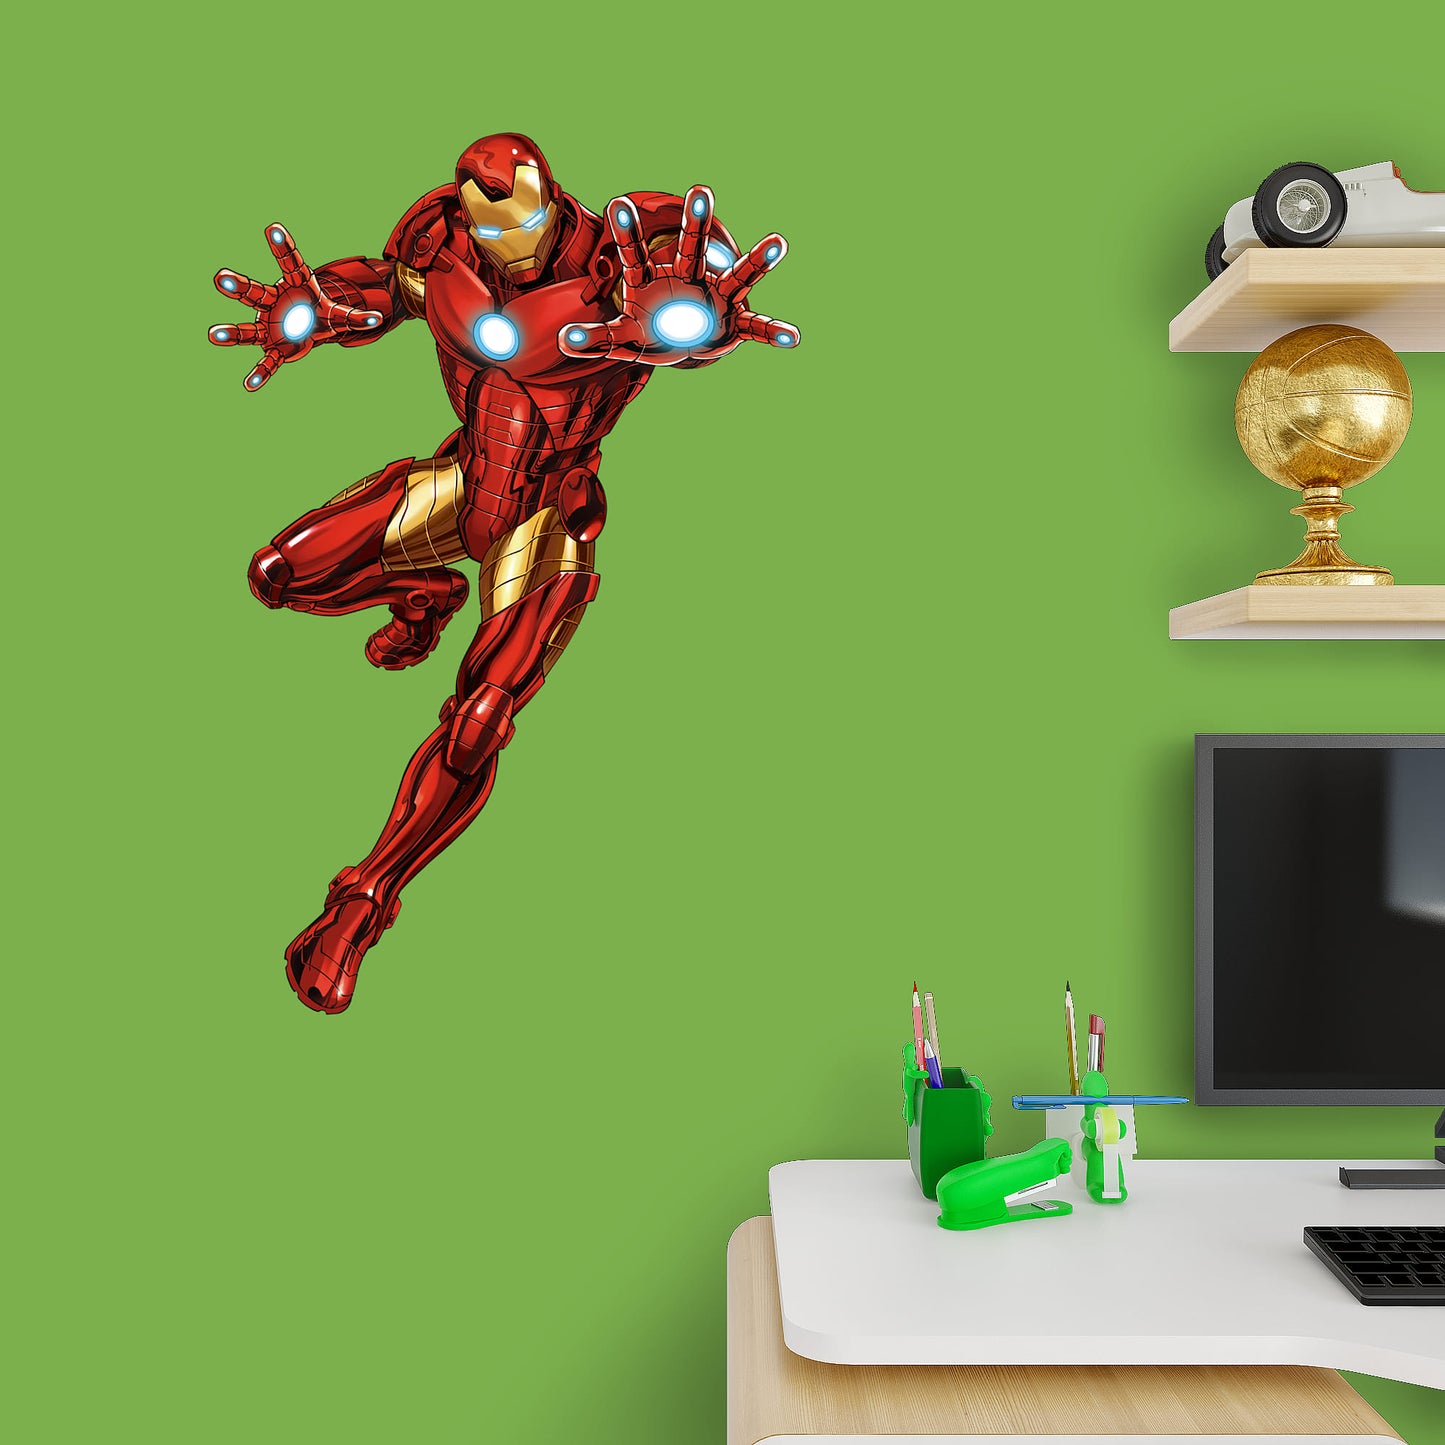 Iron Man - Officially Licensed Removable Wall Decal